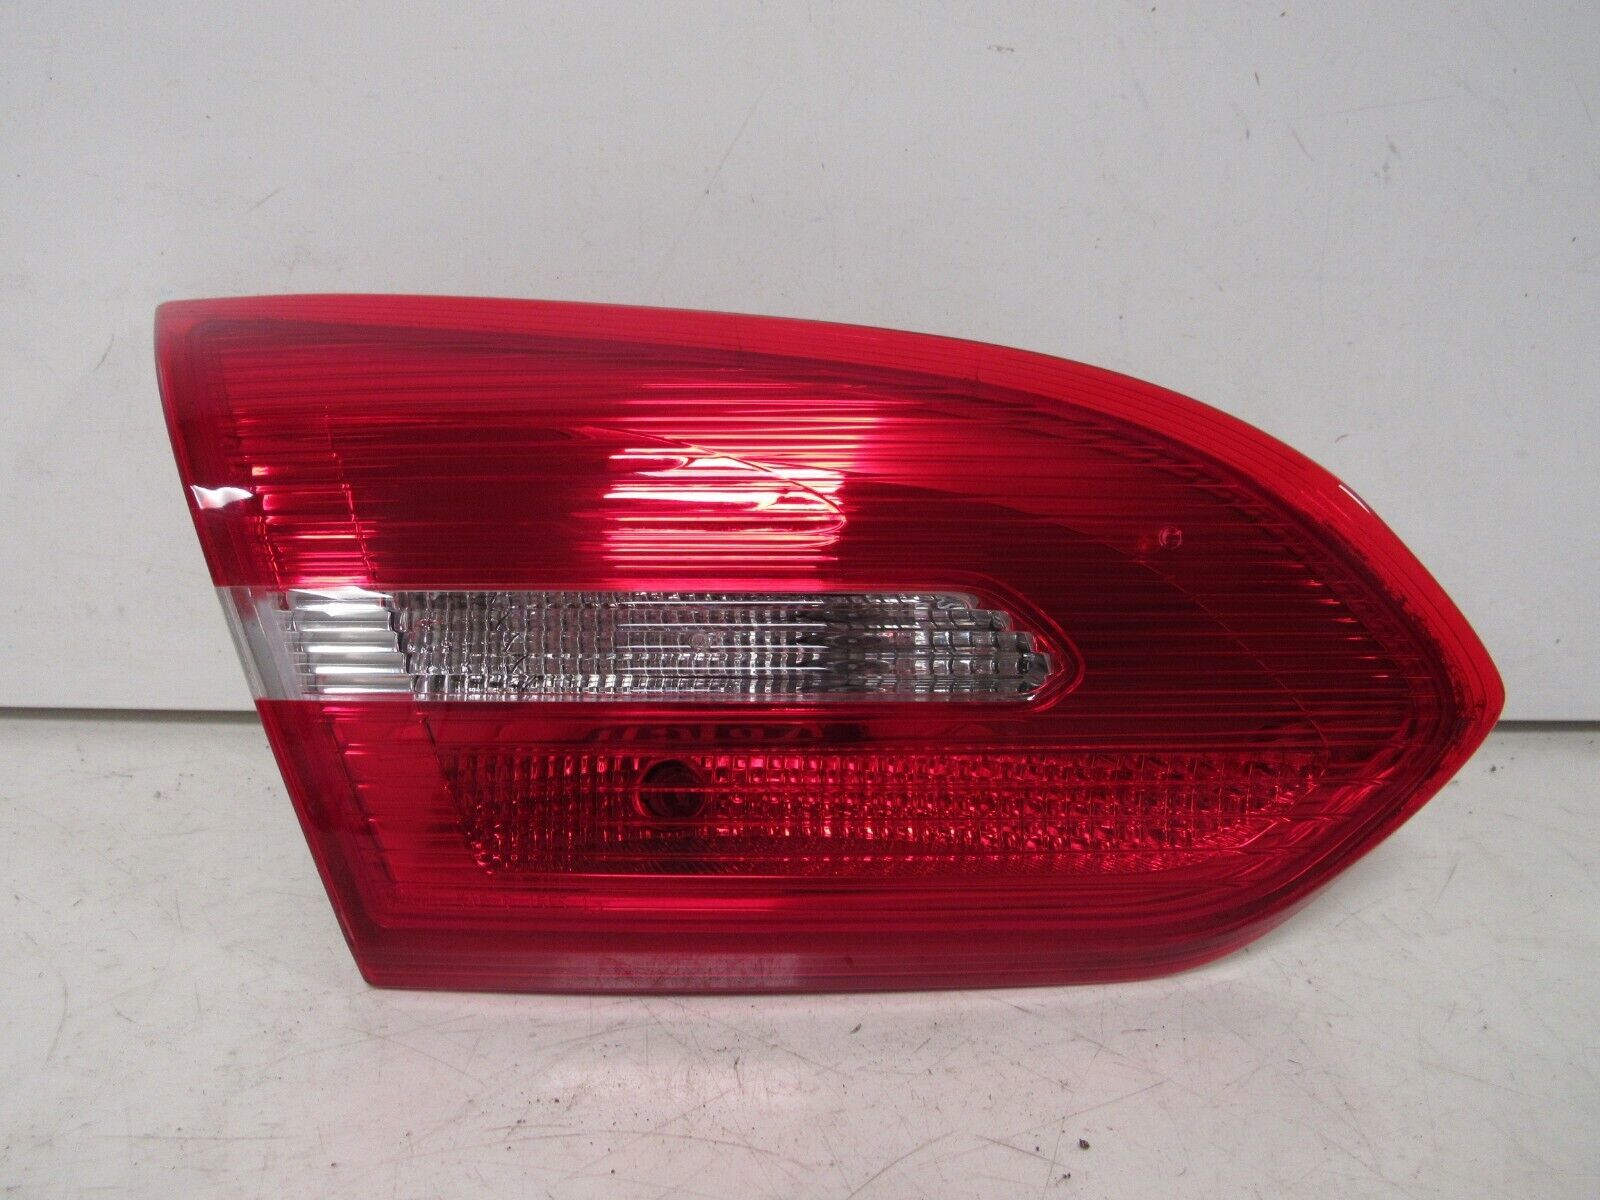 2015 2016 2017 2018 FORD FOCUS LH LID MOUNTED TAIL LIGHT OEM C103L 6860 - $49.50